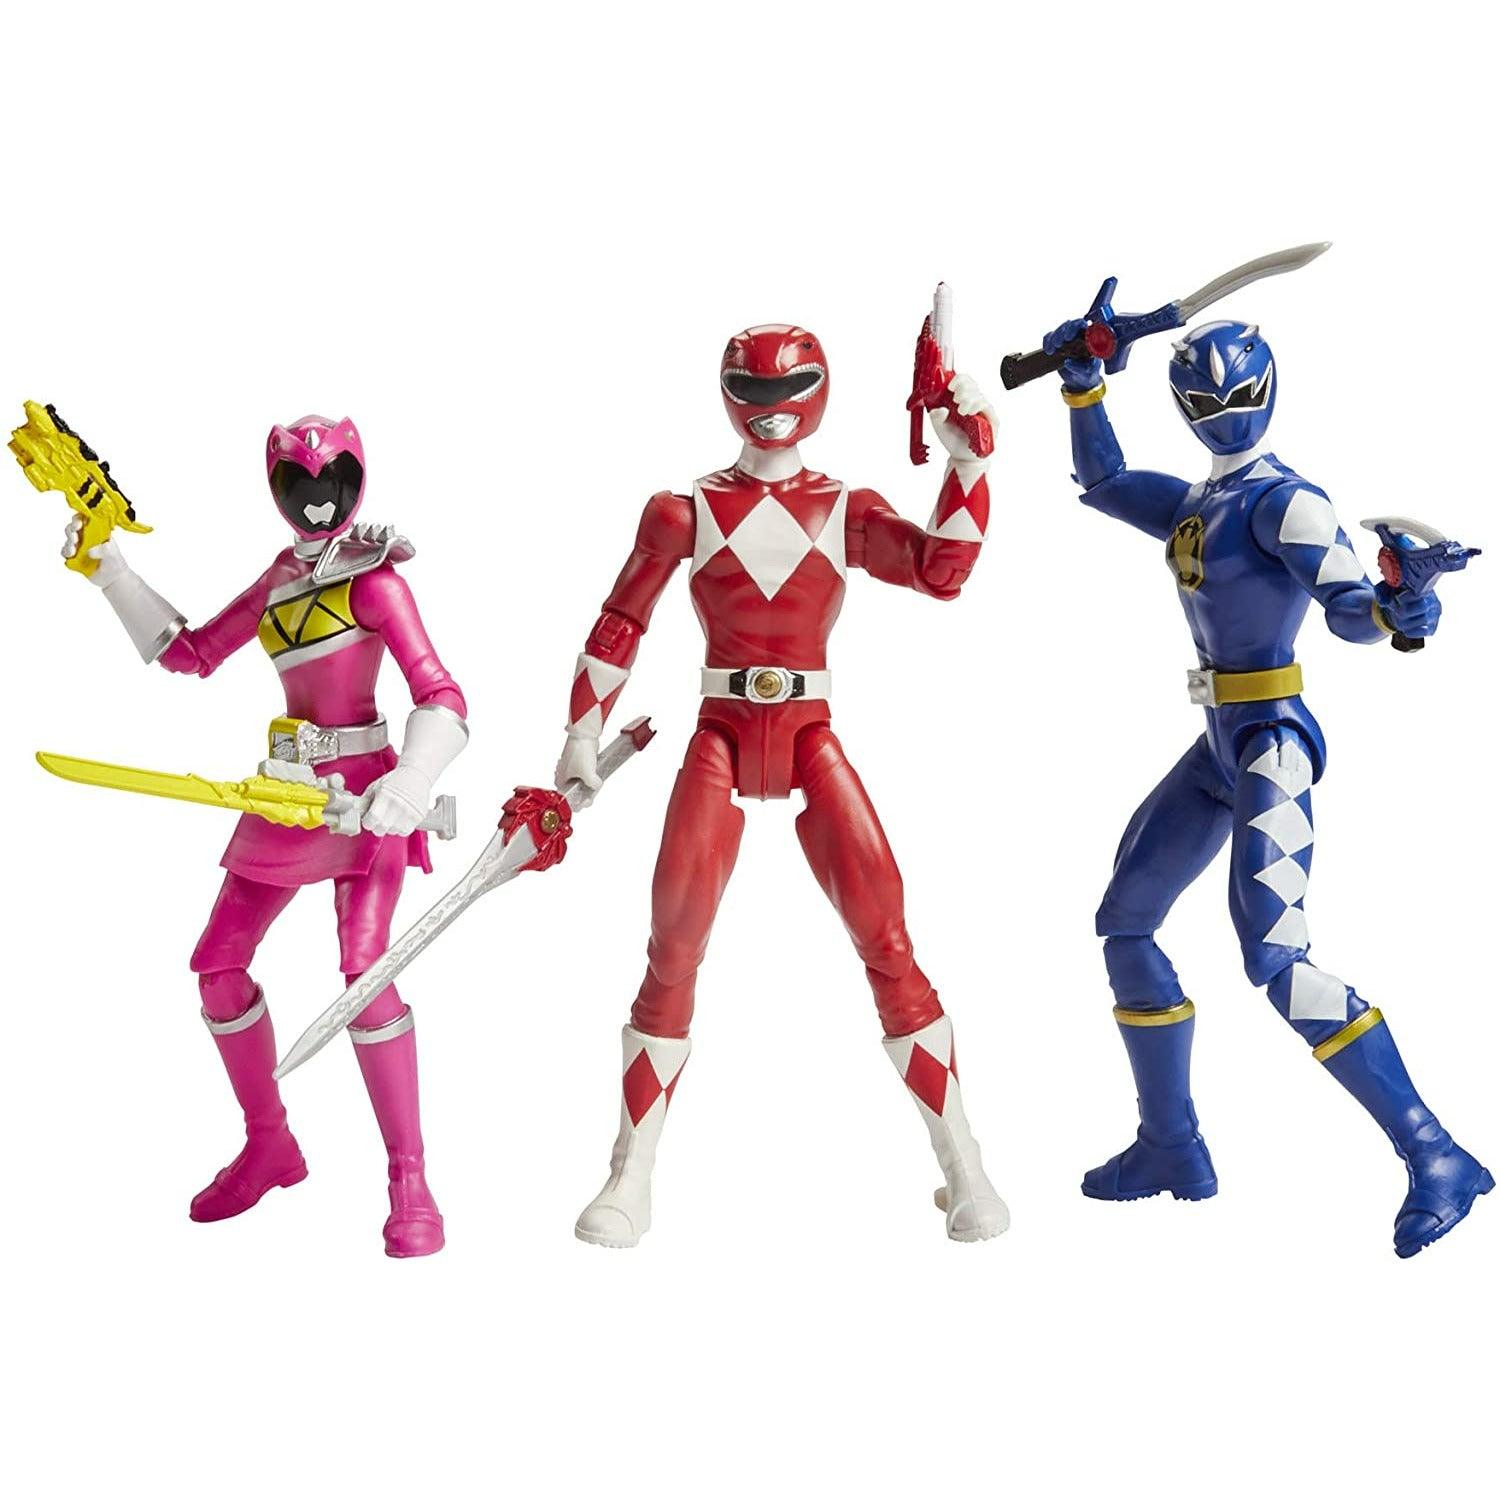 Power Rangers Beast Morphers Special Episode 3-Pack Action Figure Toys Dino Thunder Blue Ranger, Mighty Morphin Red Ranger, Dino Charge Pink Ranger - BumbleToys - 4+ Years, 5-7 Years, Action Figures, Boys, Figures, Hasbro, Power Rangers, Pre-Order